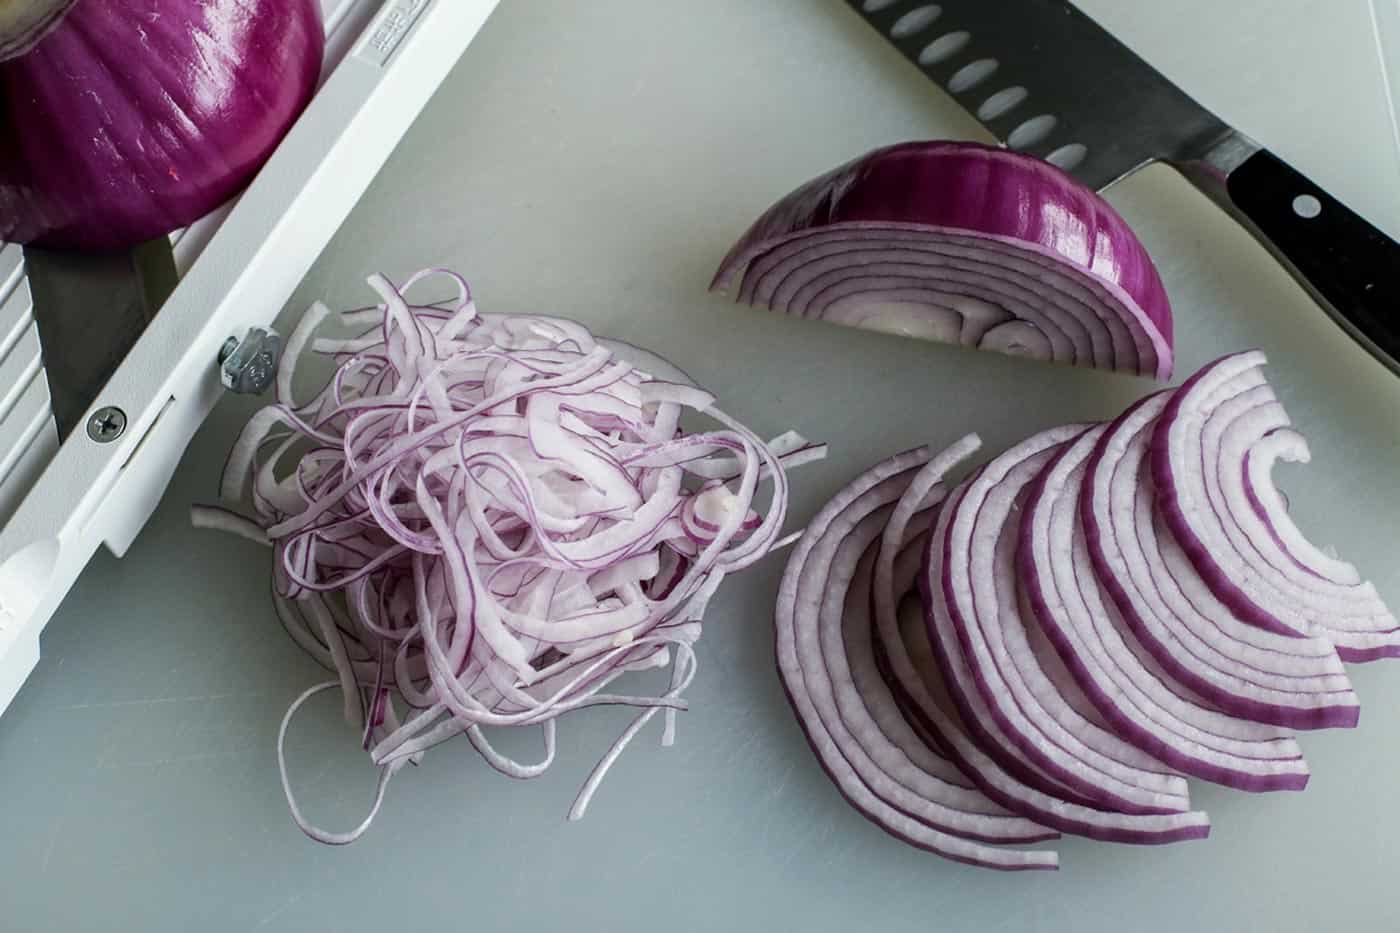 thinly sliced red onions